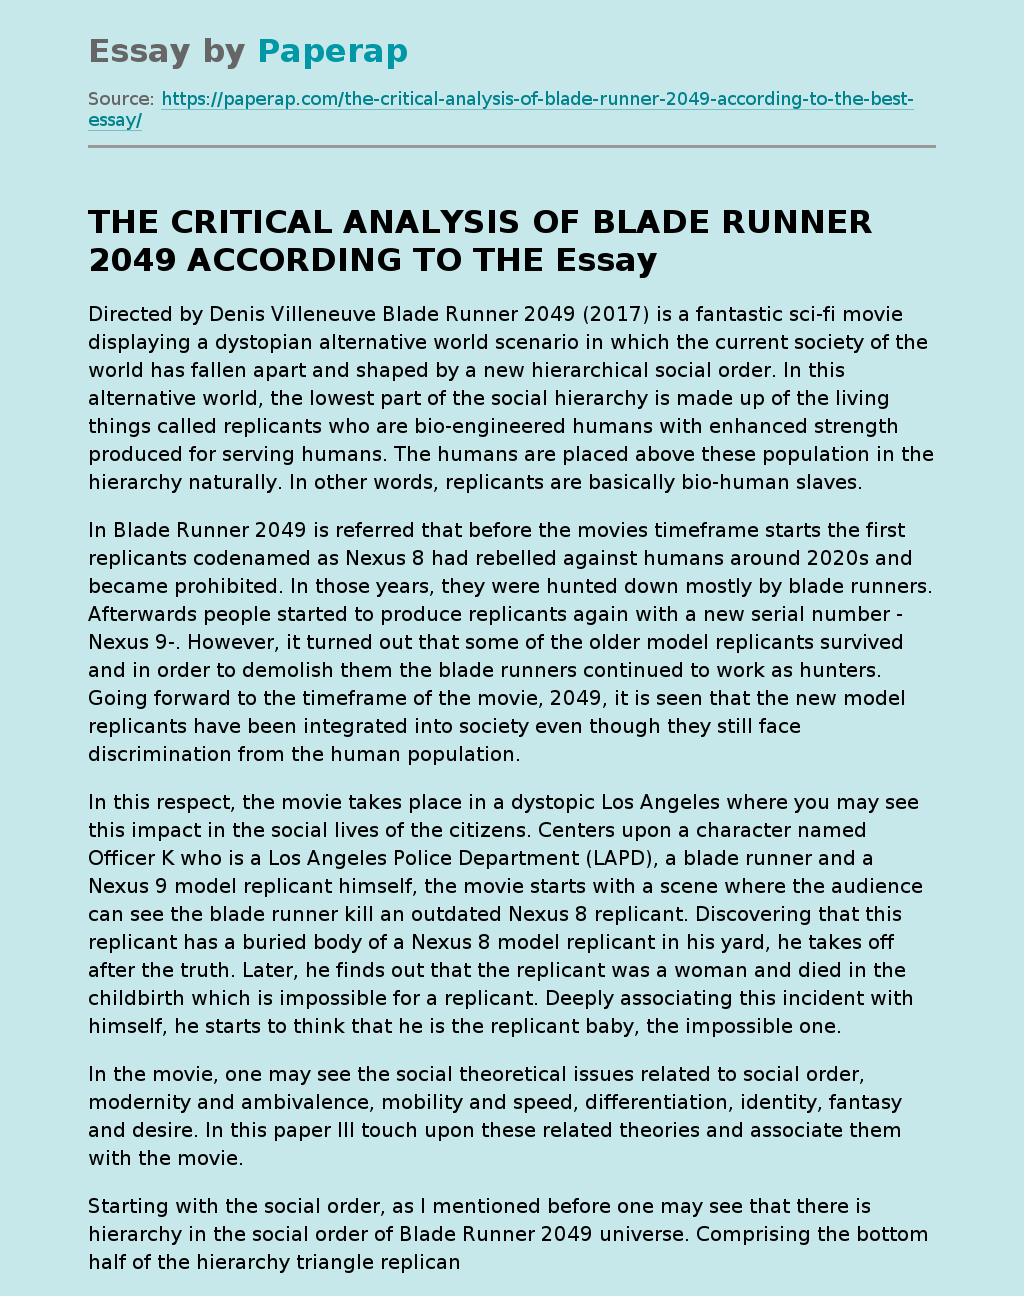 THE CRITICAL ANALYSIS OF BLADE RUNNER 2049 ACCORDING TO THE